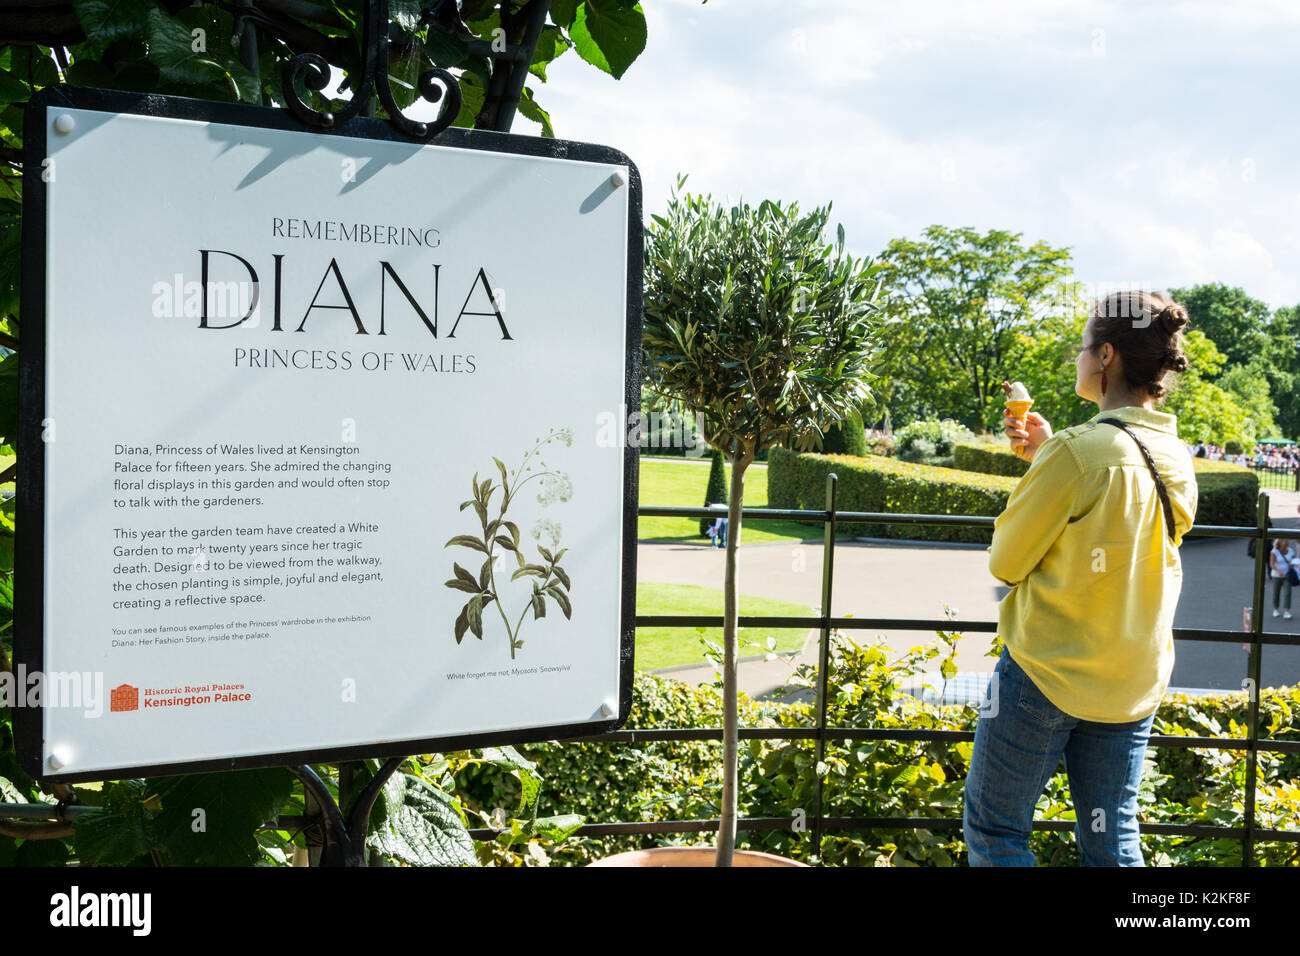 Well-wishers visit the White Garden at Kensington Palace to commemorate and pay tribute to Princess Diana, twenty years after her death. Stock Photo